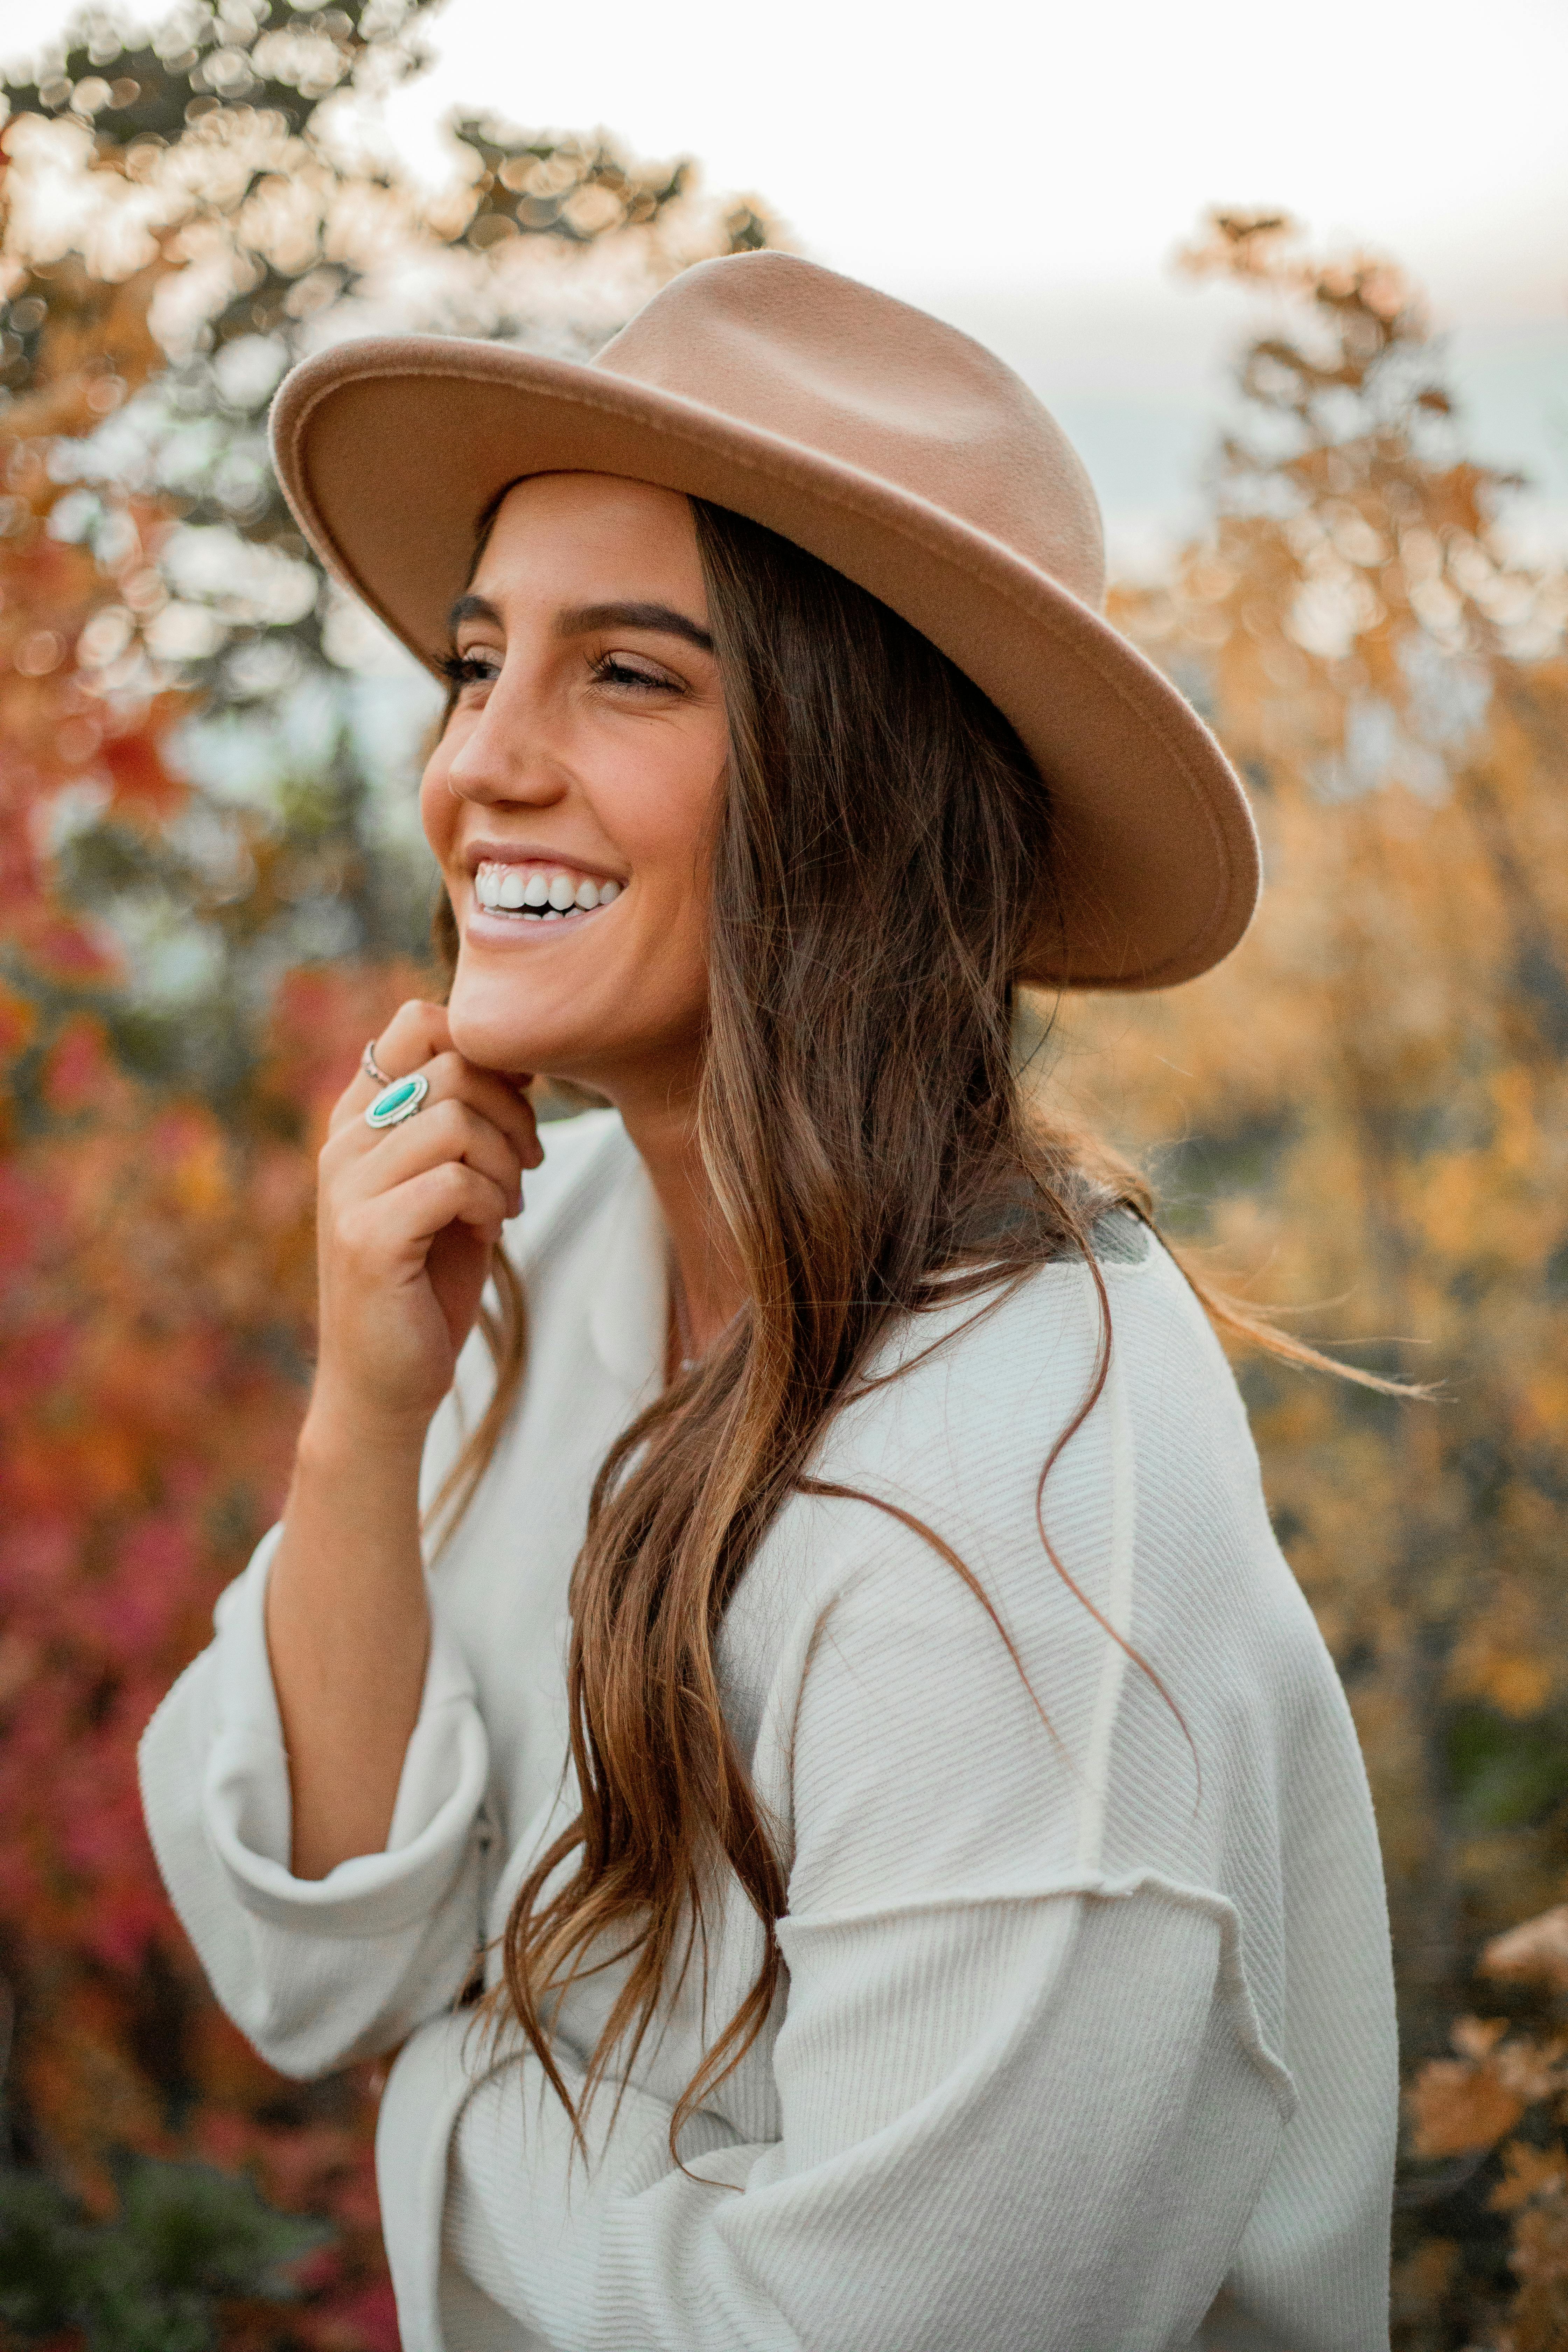 Smiling Woman Wearing Brown Hat and White Long Sleeve Shirt · Free Stock  Photo